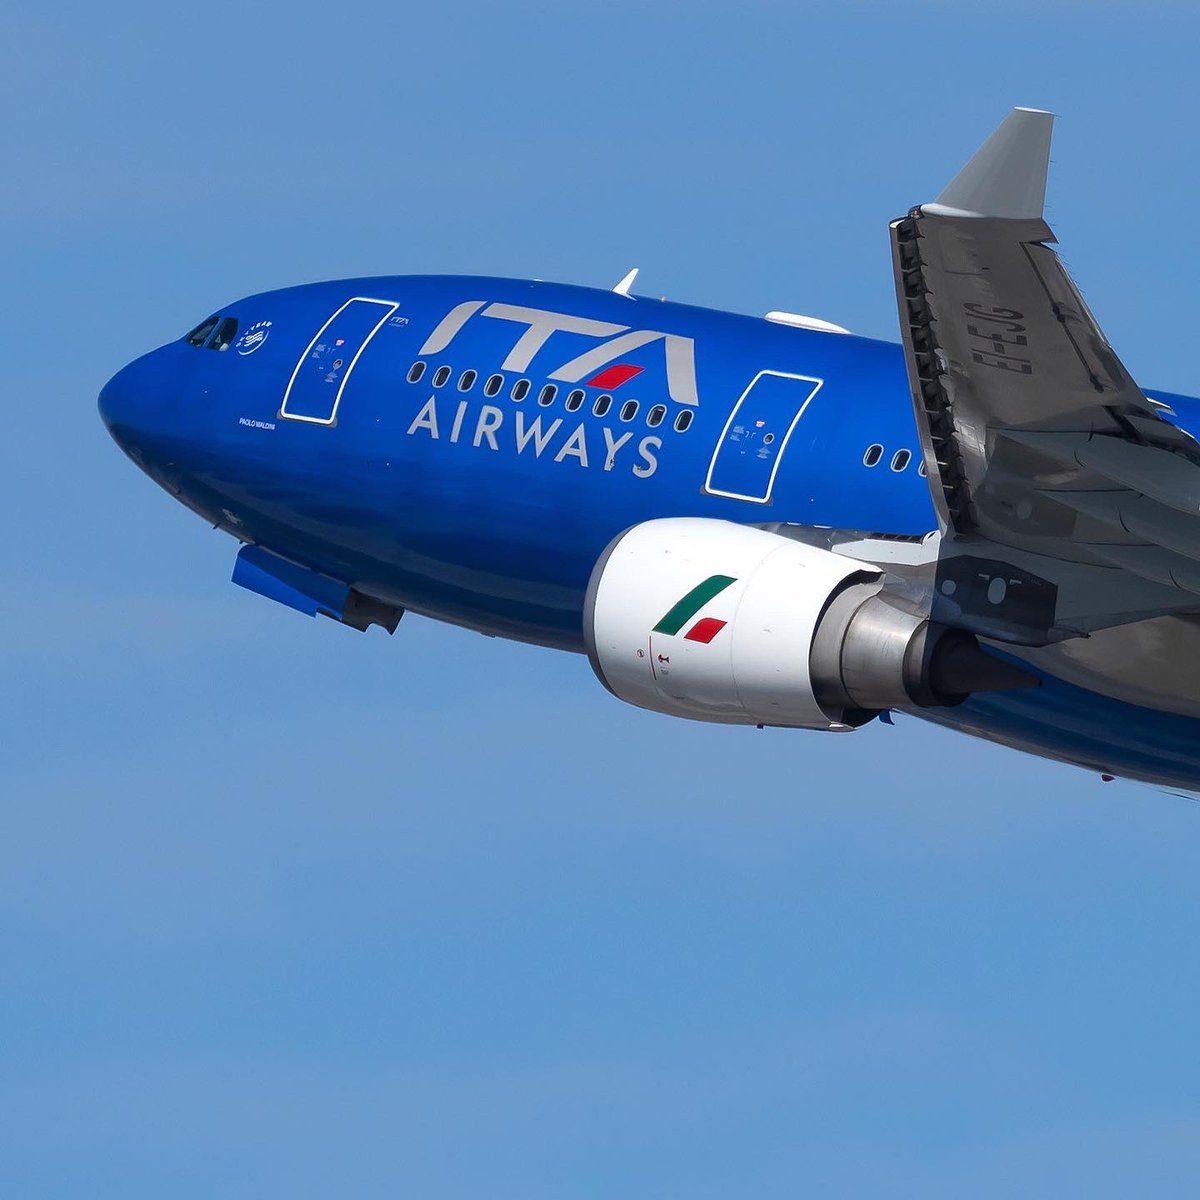 As JFK awaits the exciting arrival of ITA Airways’ A350 next month, I’m enjoying photographing closeups of their stunning livery on the Airbus 330s. #aviation #itaairways #avgeek #airbus #aviationphotography #aviationdaily #aviationlovers #italy